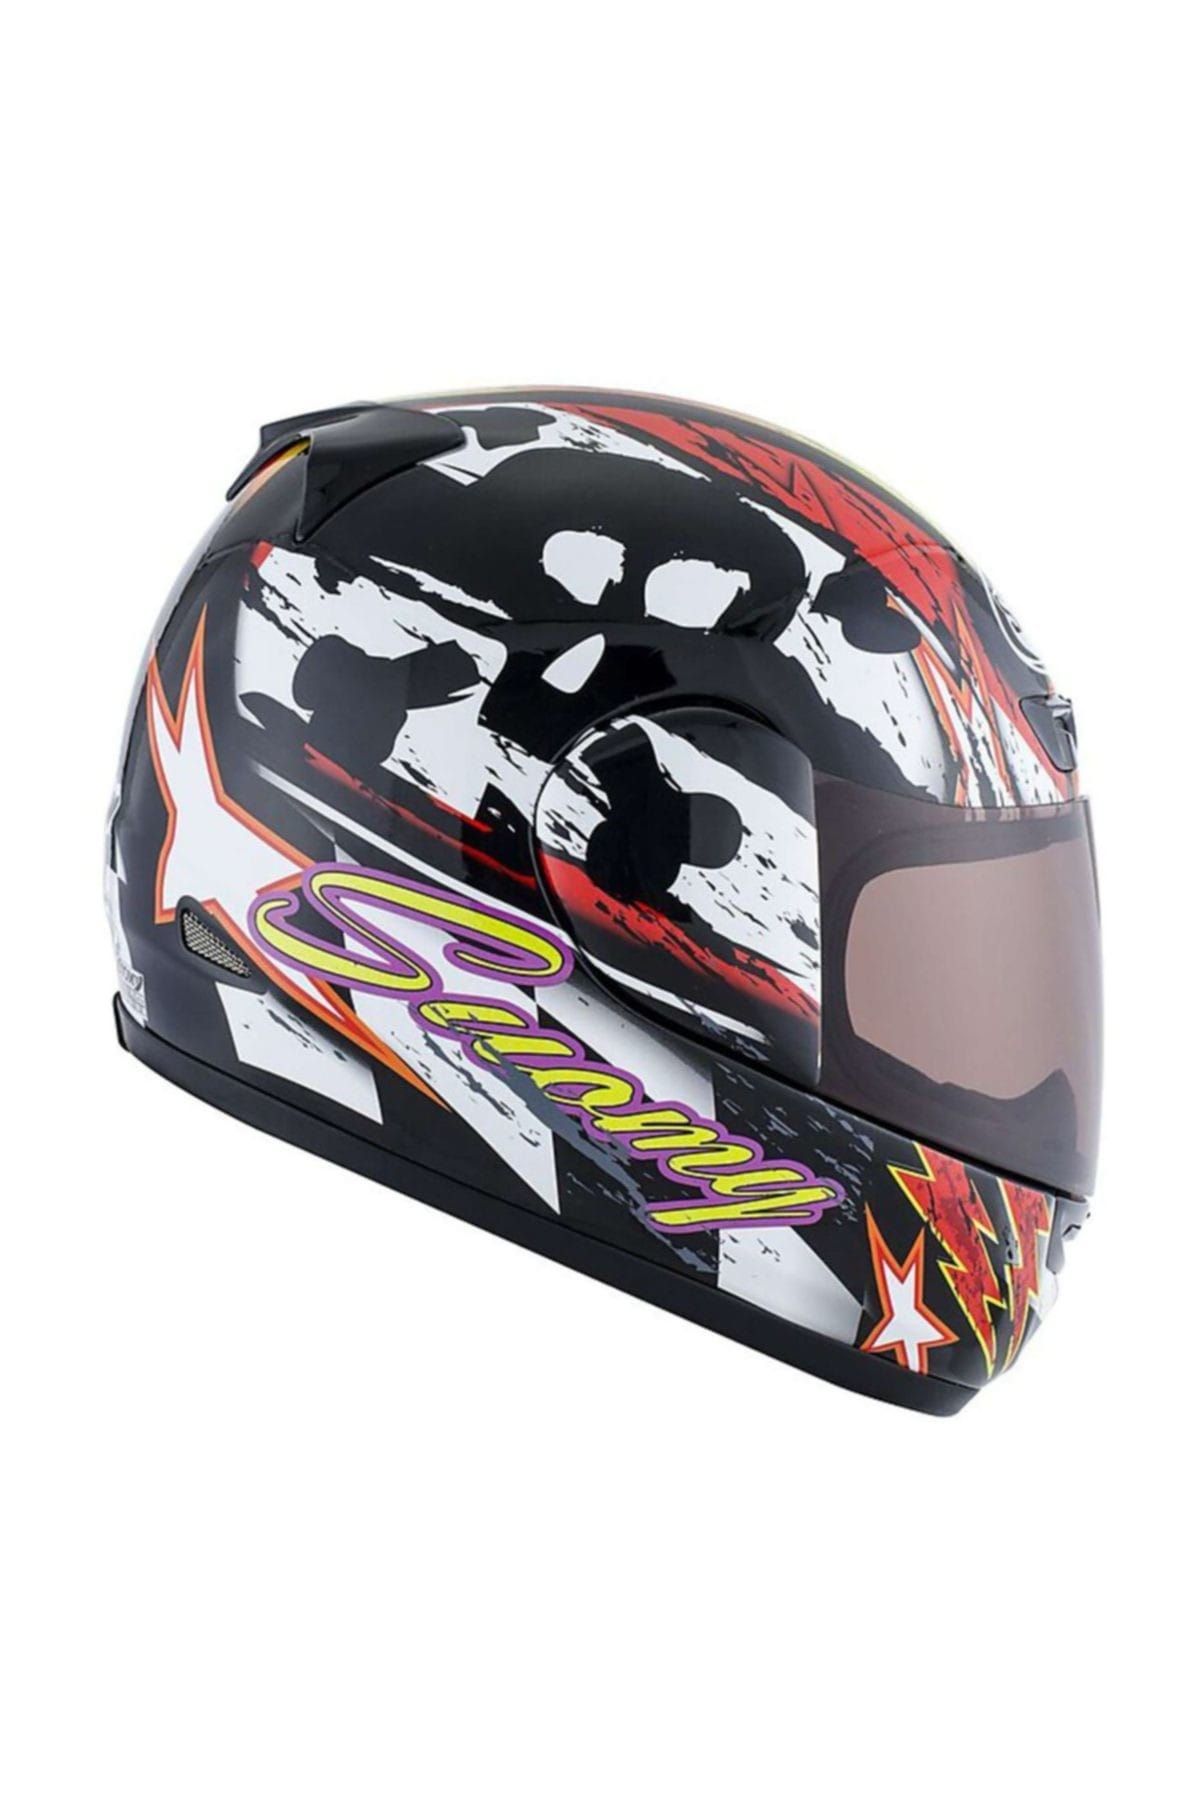 Suomy Apex Rolling Thunder Kask